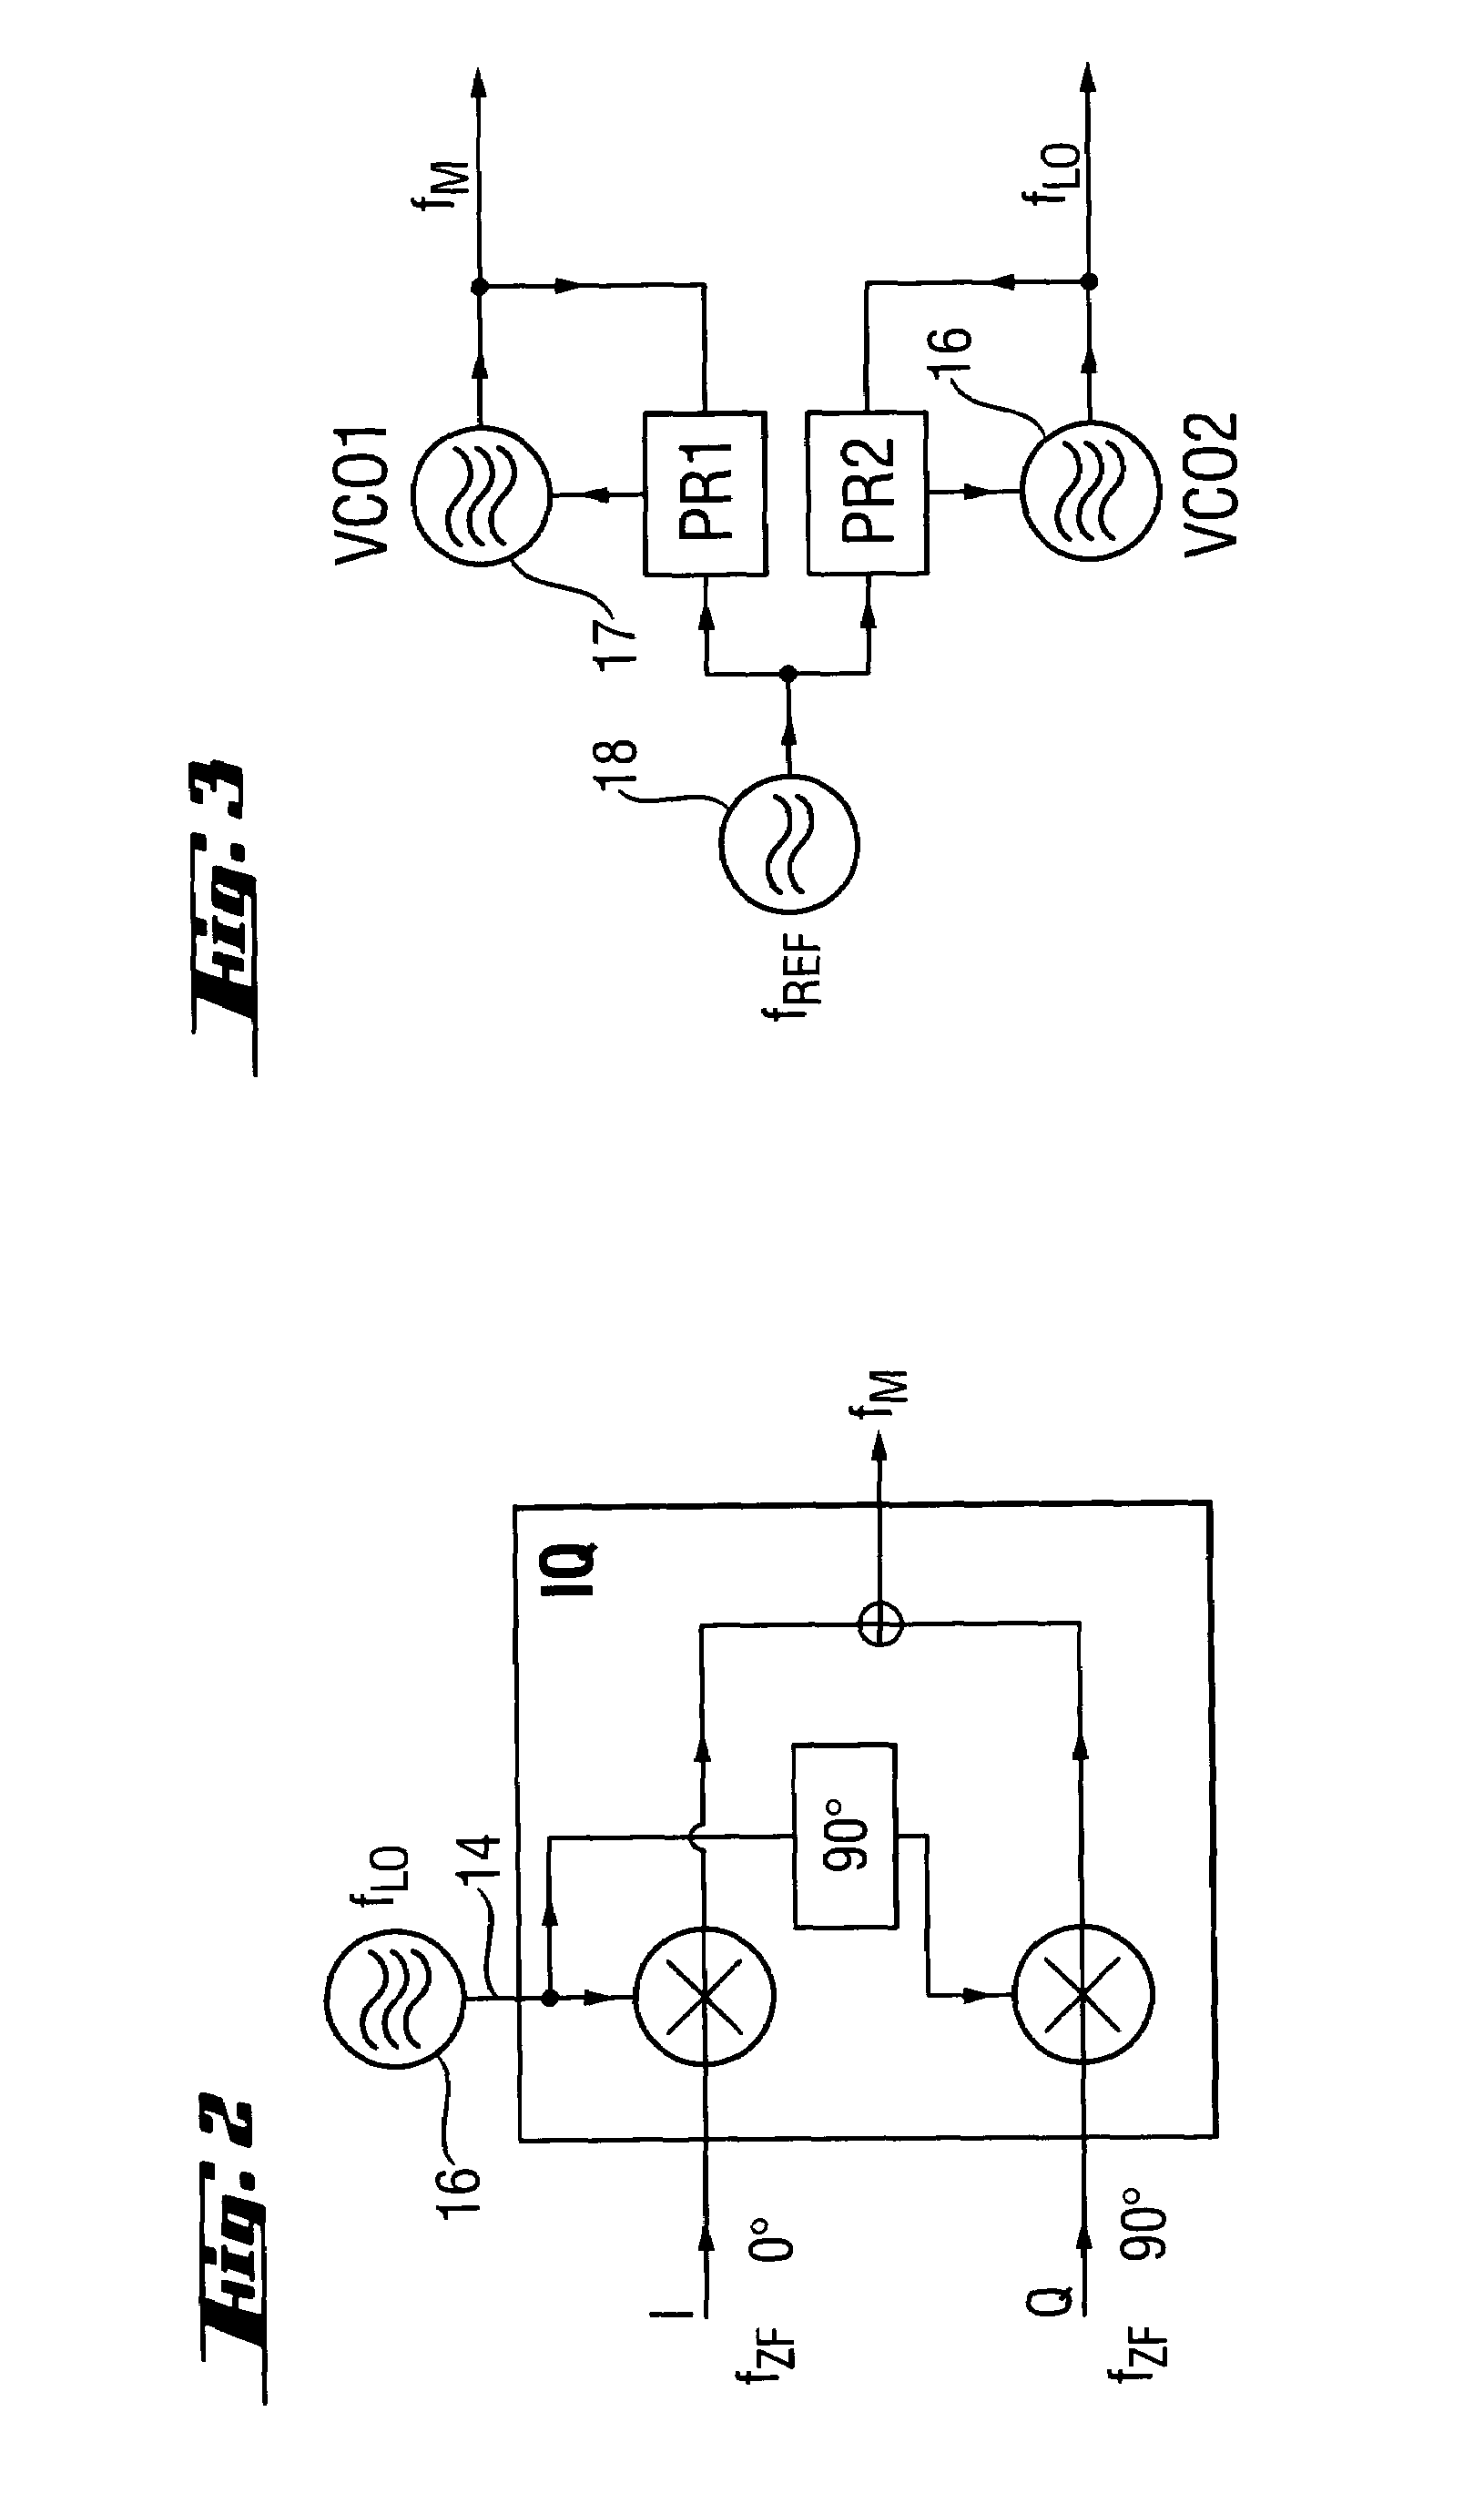 Laser distance measuring device with phase delay measurement